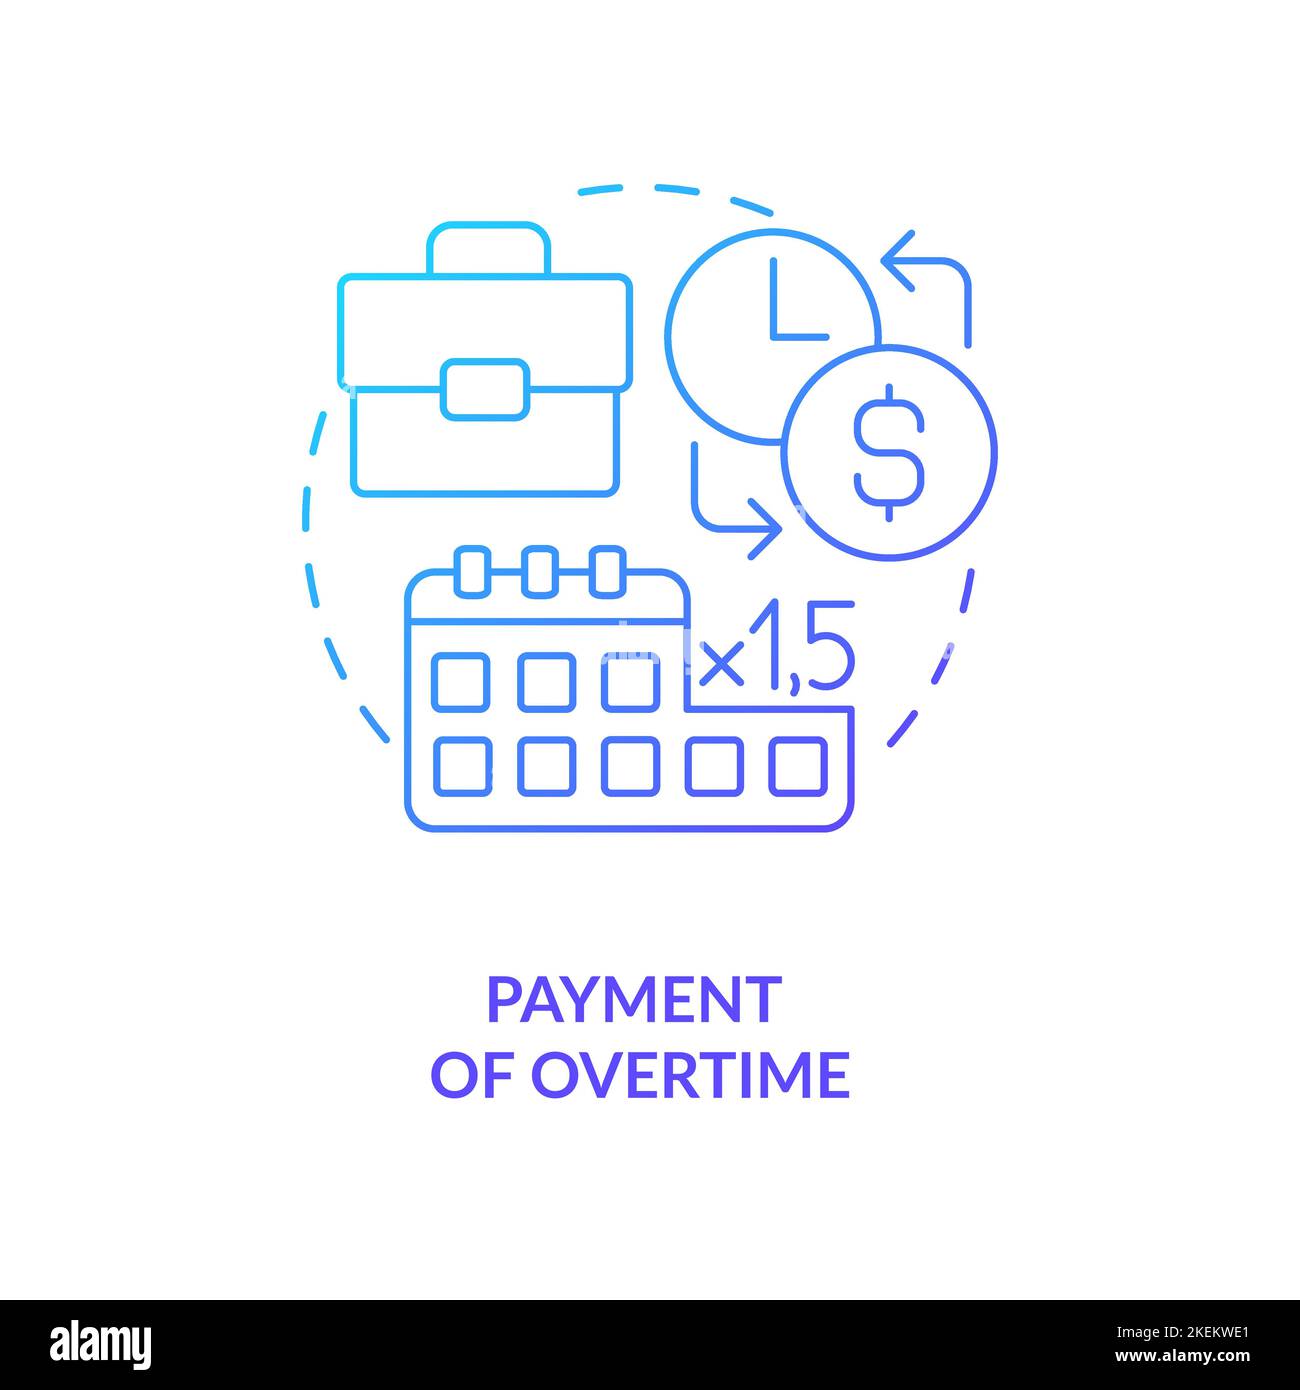 Payment of overtime blue gradient concept icon Stock Vector